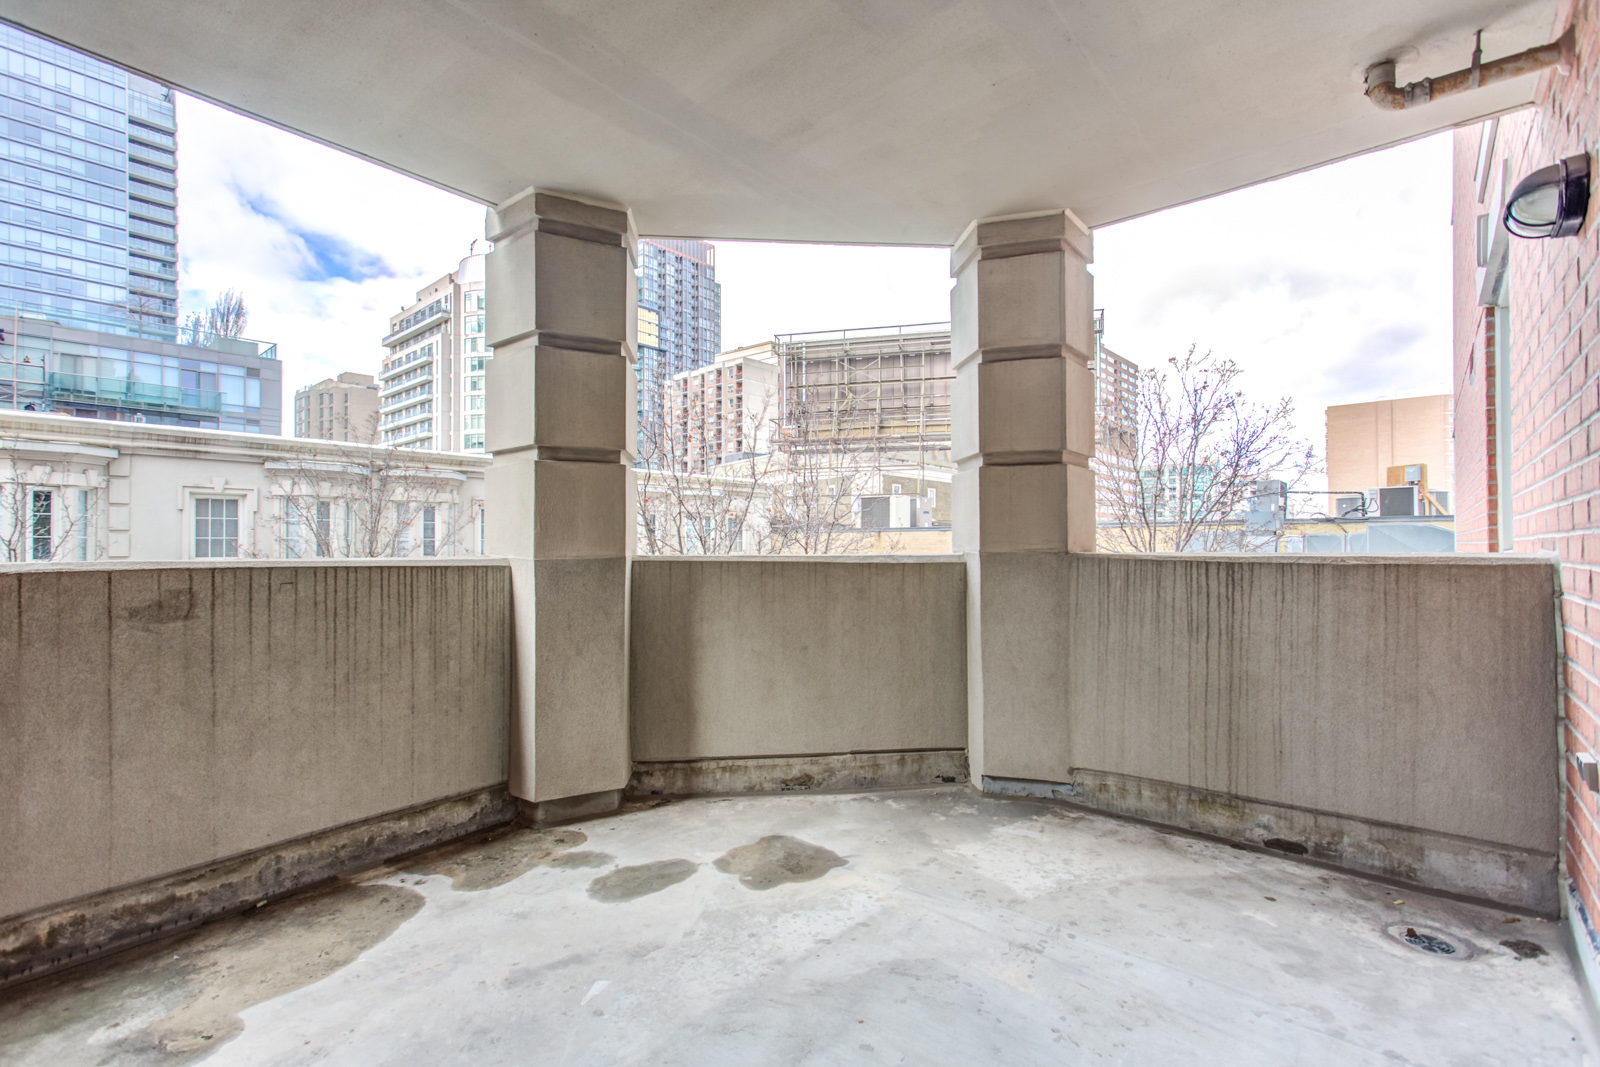 Concrete balcony of 20 Collier St Unit 408 with columns and view of Yorkville beyond.